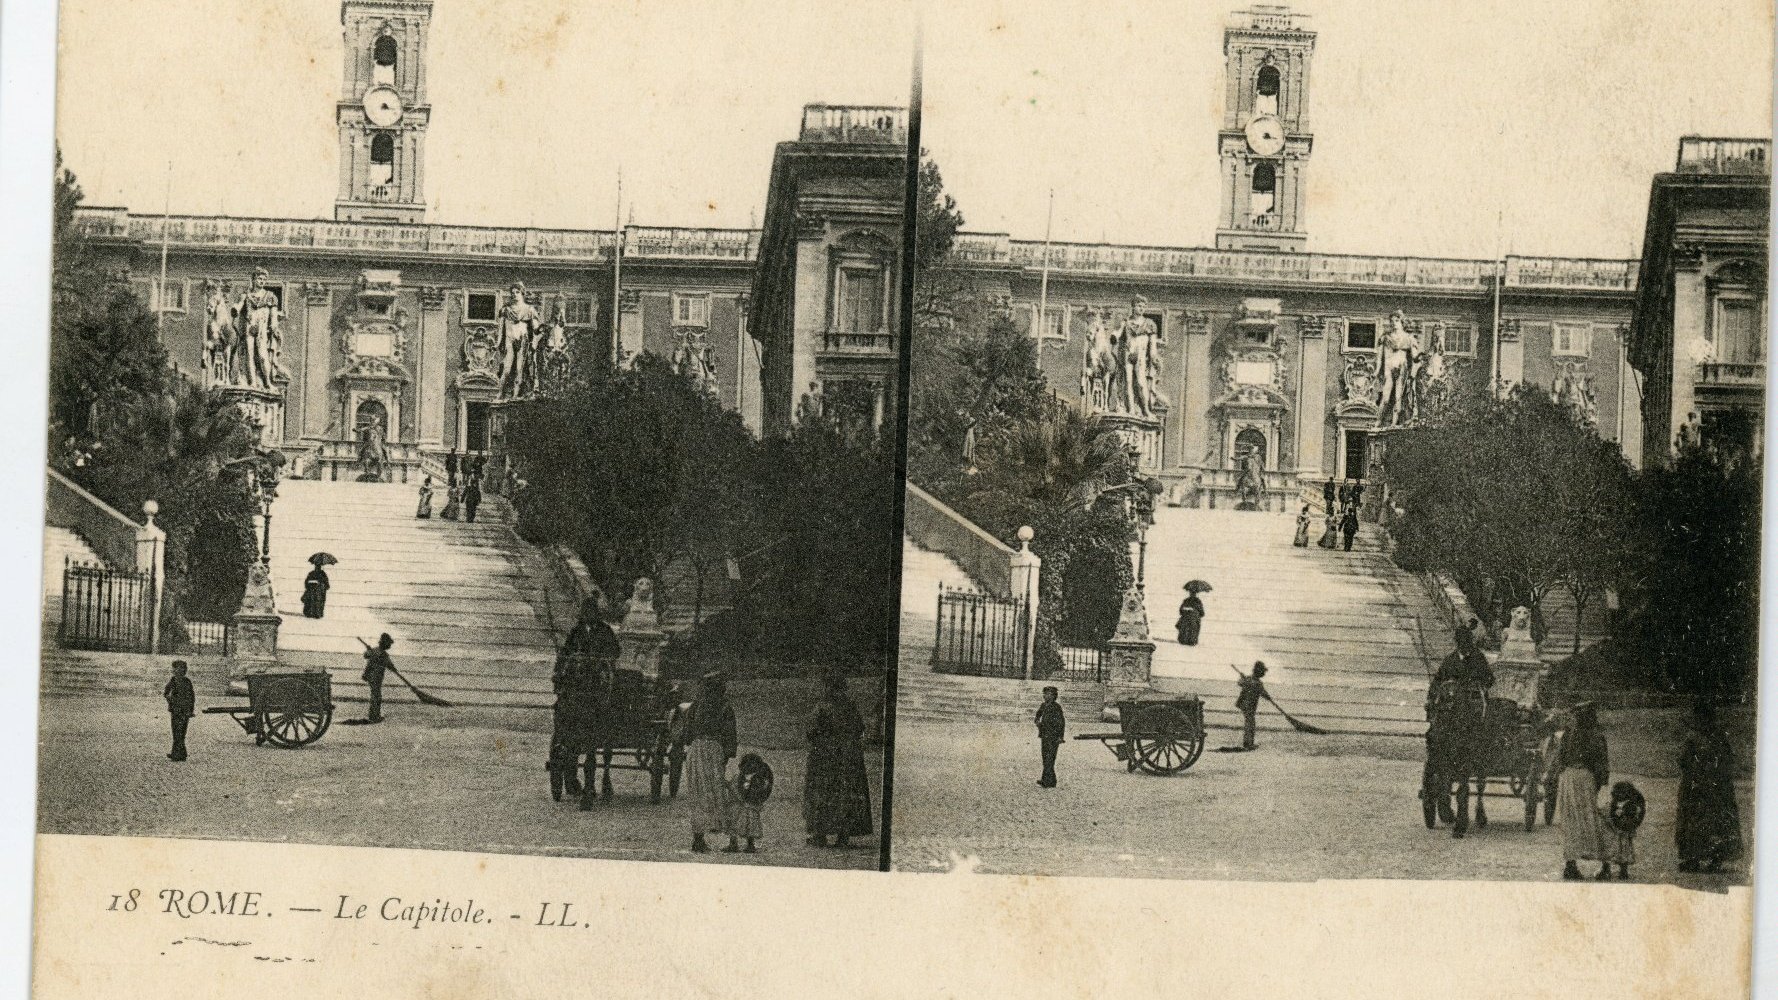 Black and white stereoscopic photograph of Capitoline Hill - stairs to the building and a few people on and in front of them. Trees along the stairs.